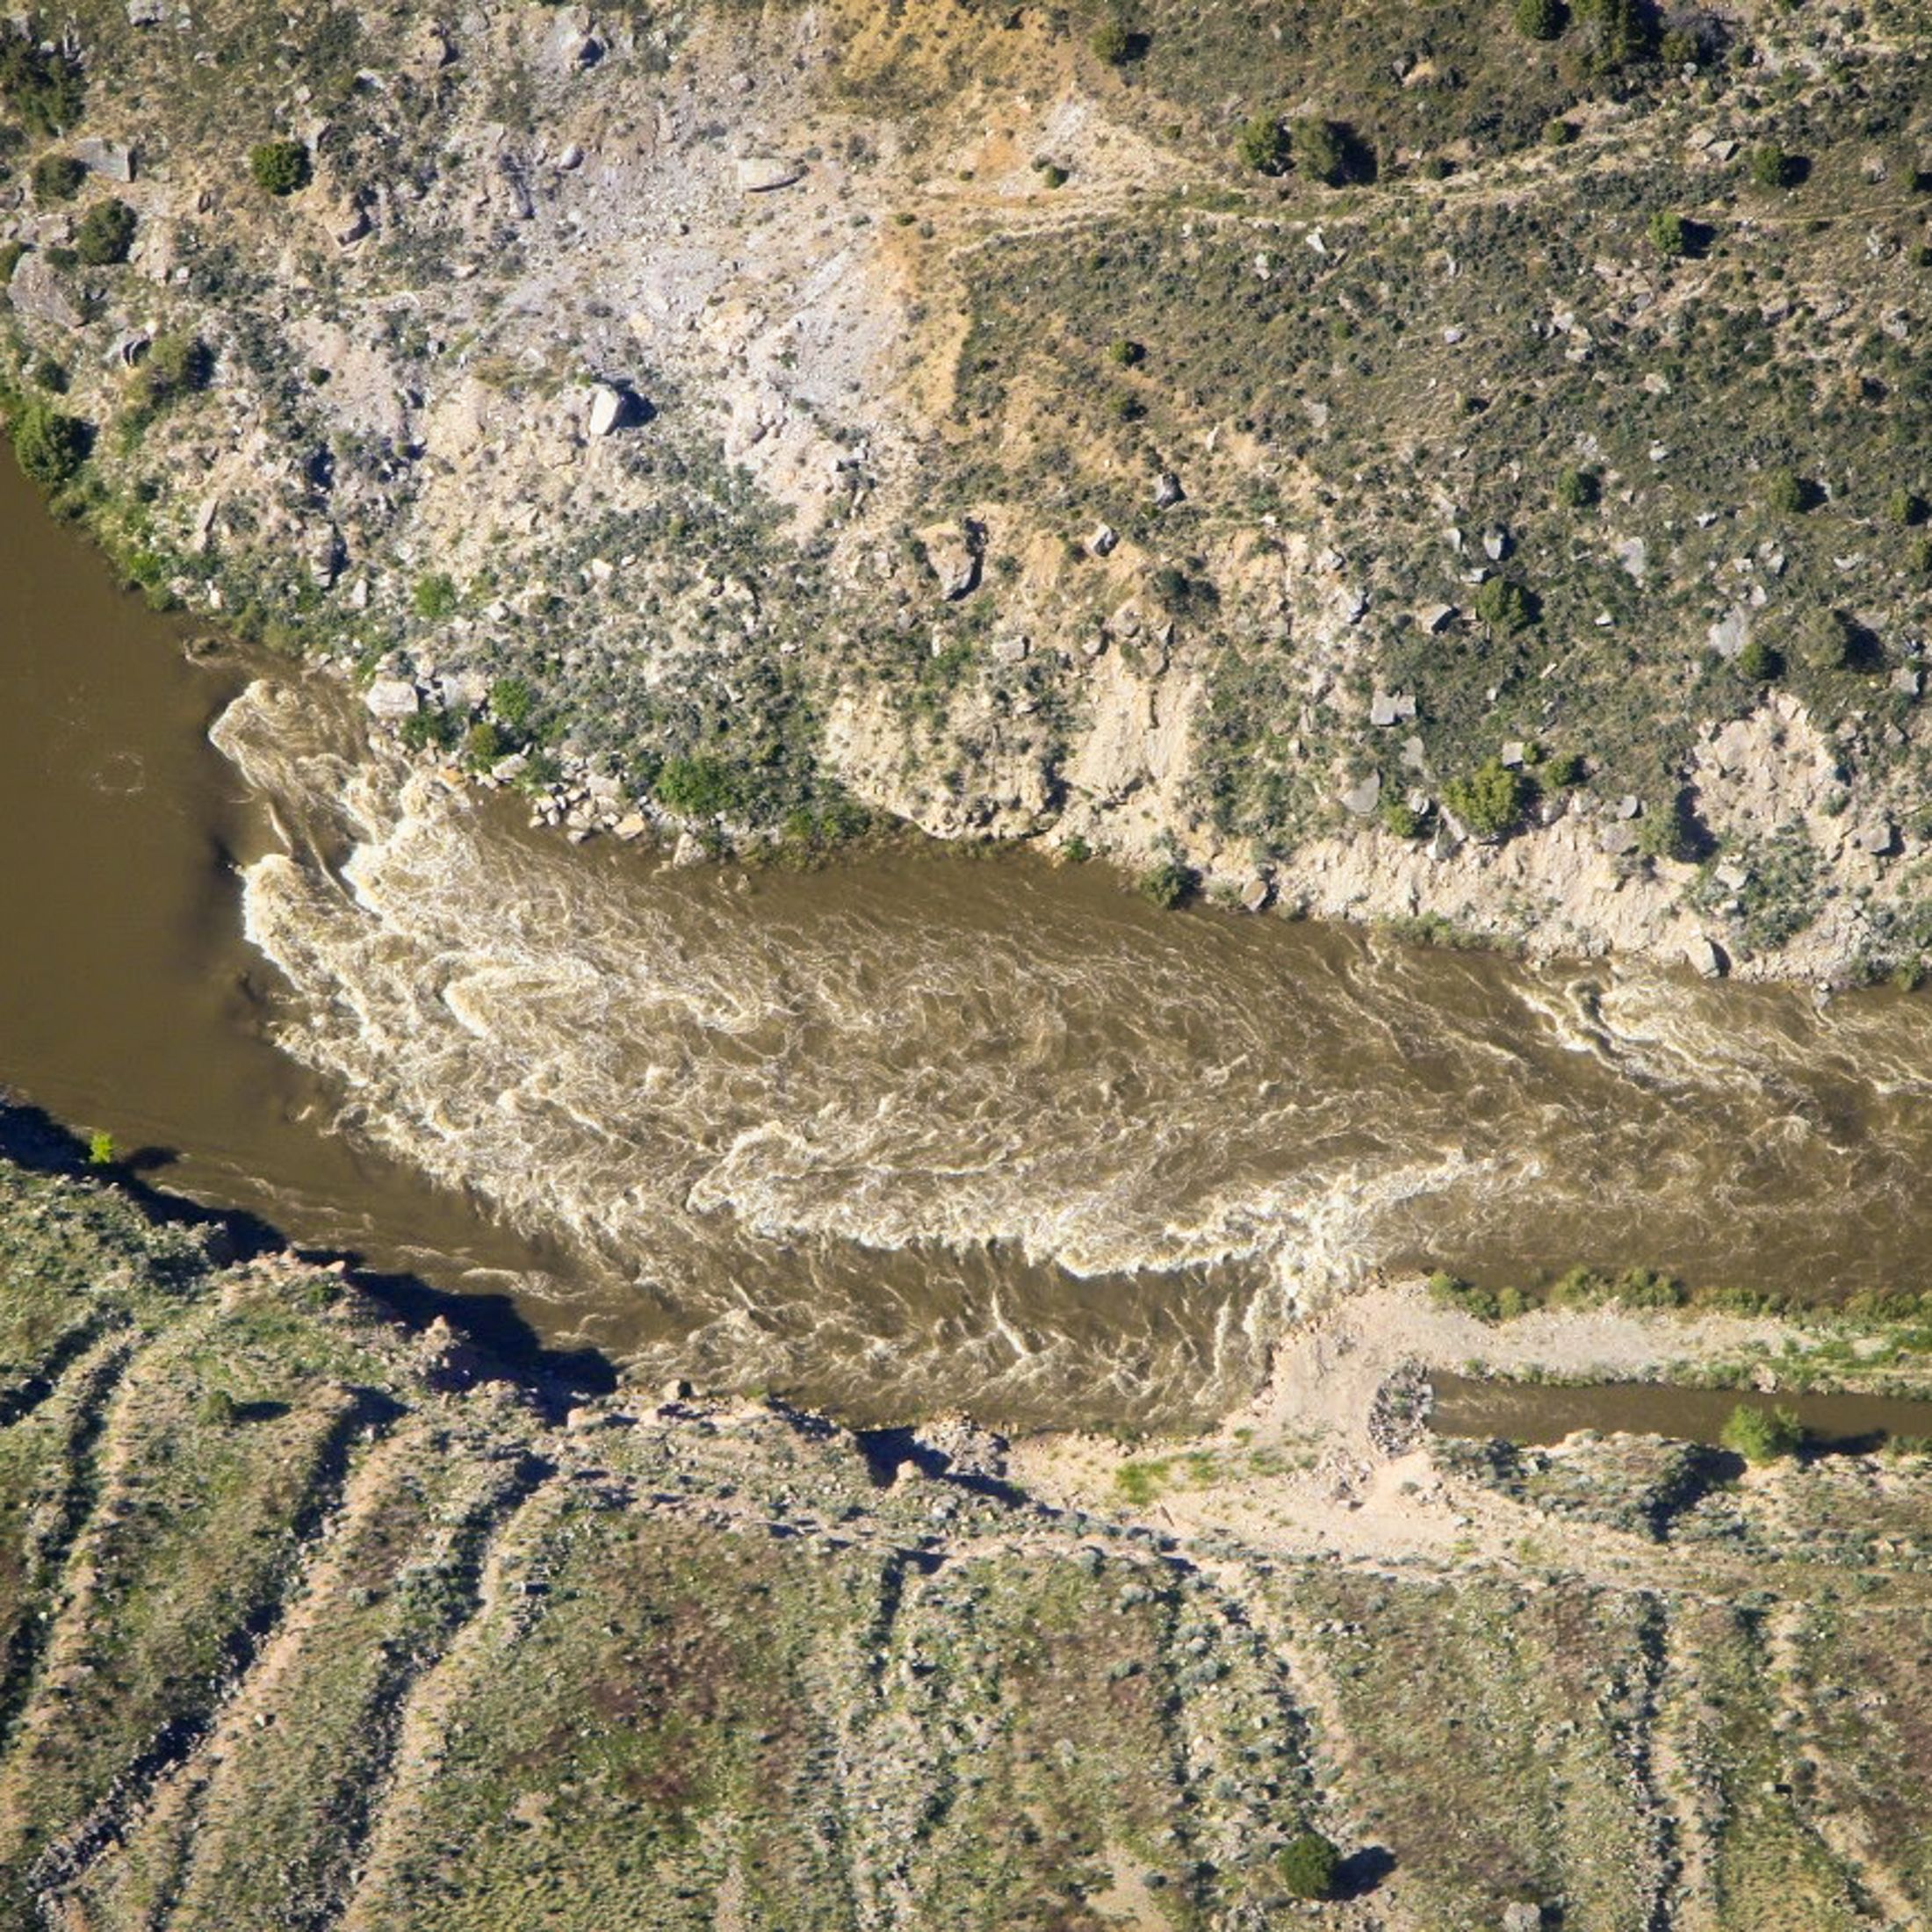 aerial view of a river flowing through a desert.